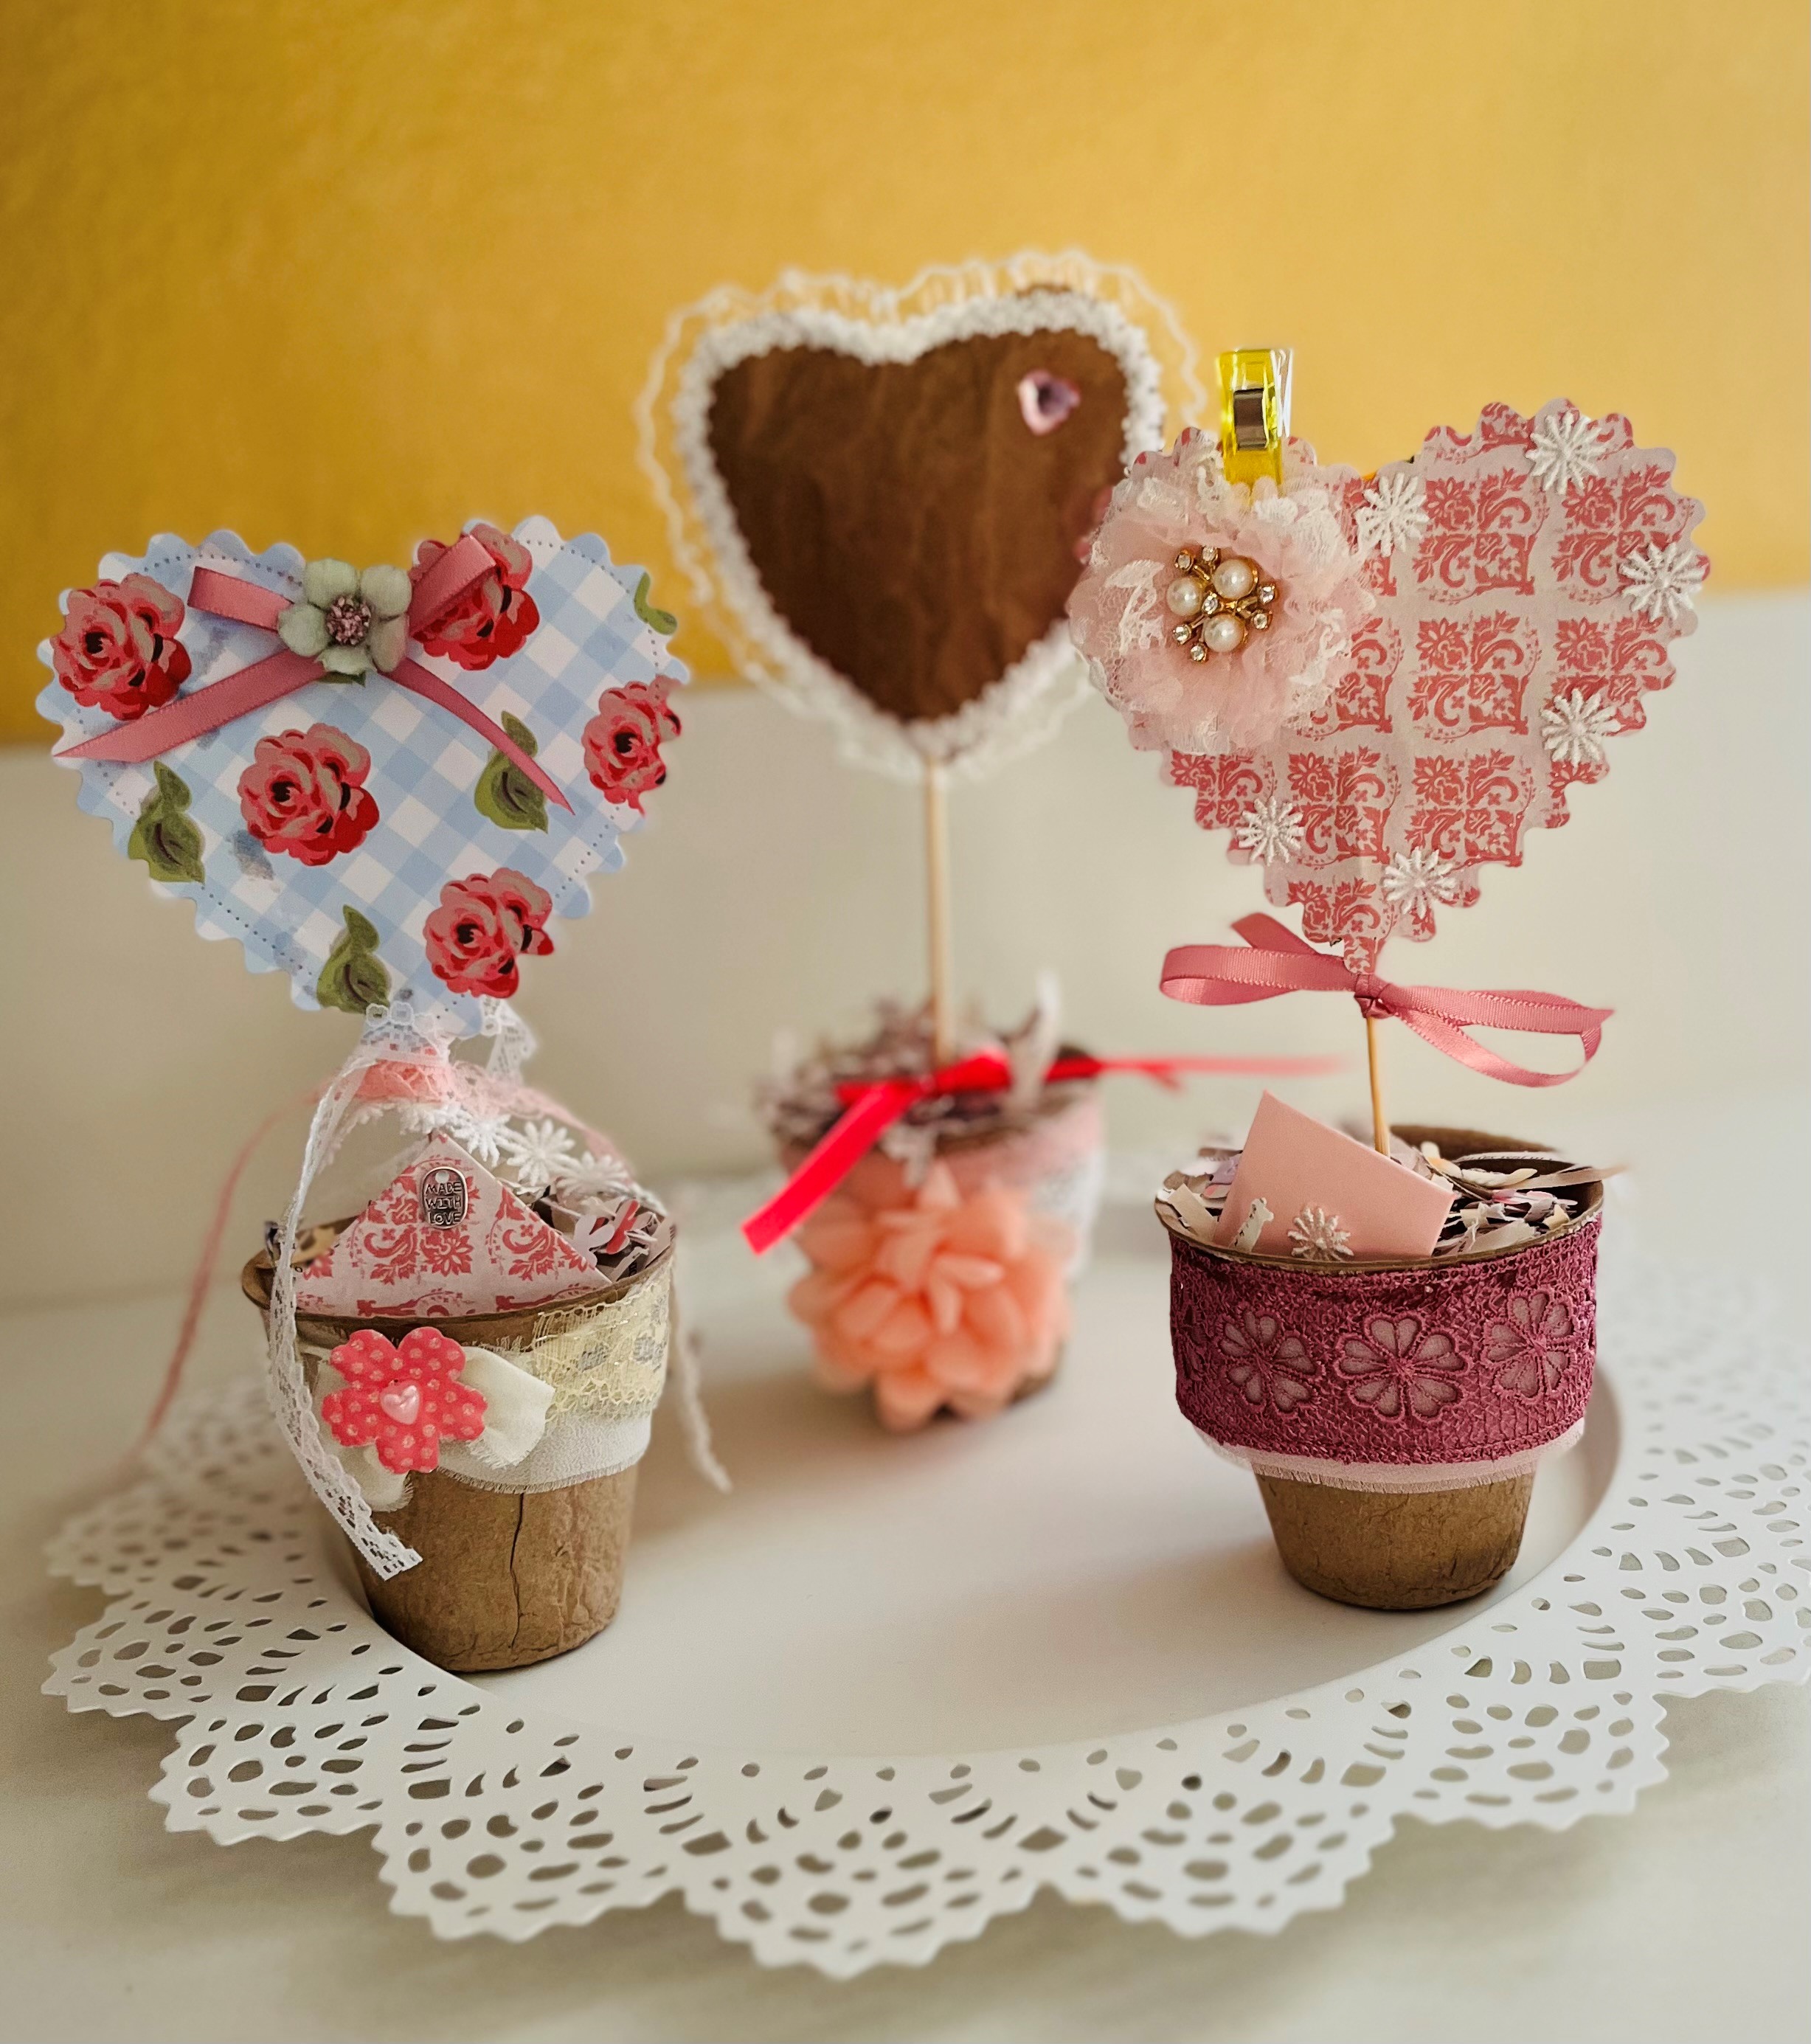 Valentine topiary samples, including a plant pot, lace paper pieces, and ribbon on a red background